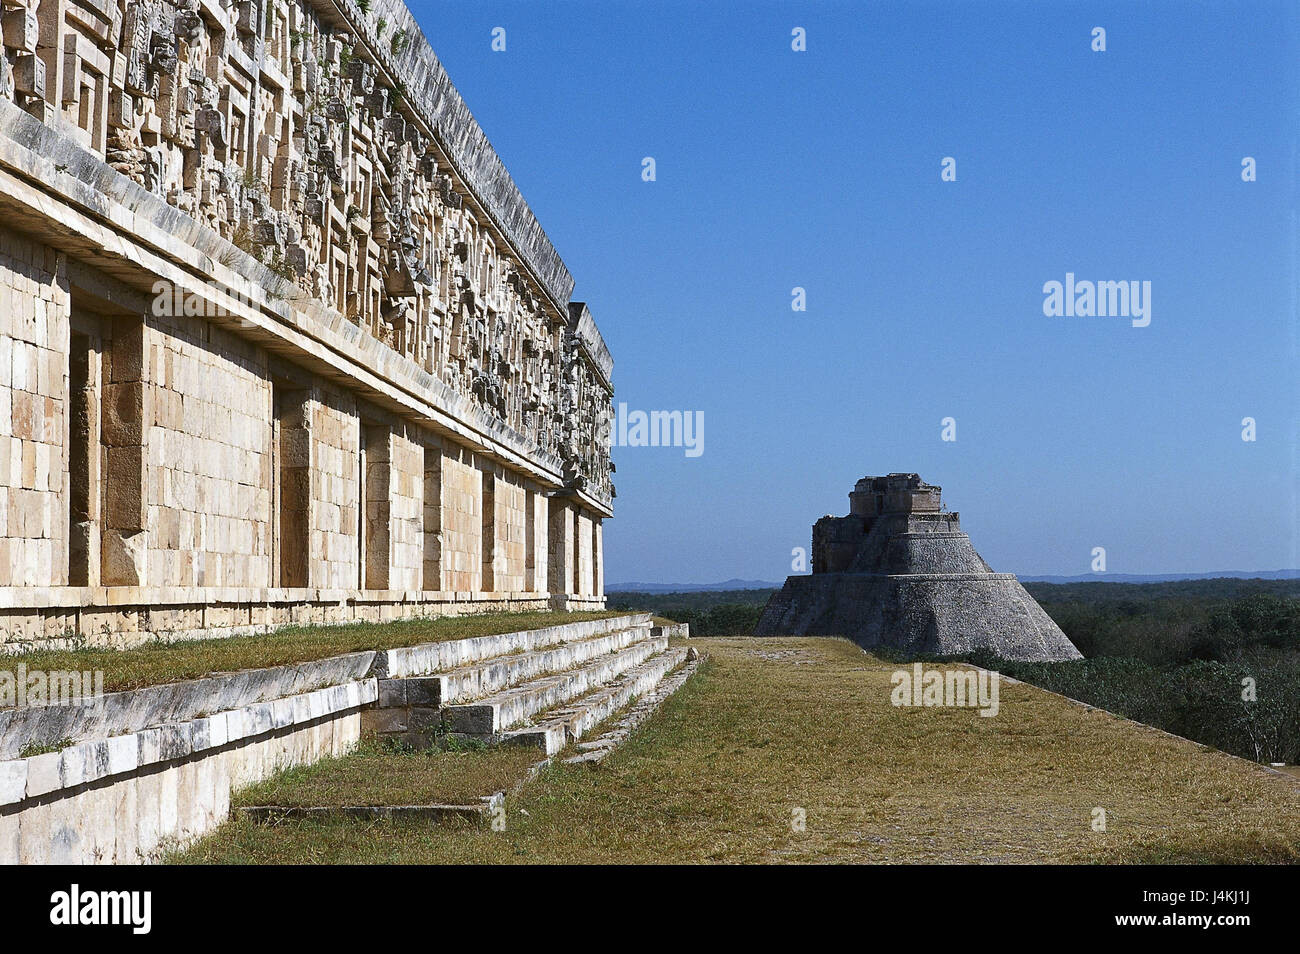 Mexico, Yucatan, Uxmal, governor's palace Palacio del Gobernador, palace of the Governeurs, government palace, Puuc style, ruin town, cult site, Maya's culture, UNESCO-world cultural heritage Stock Photo